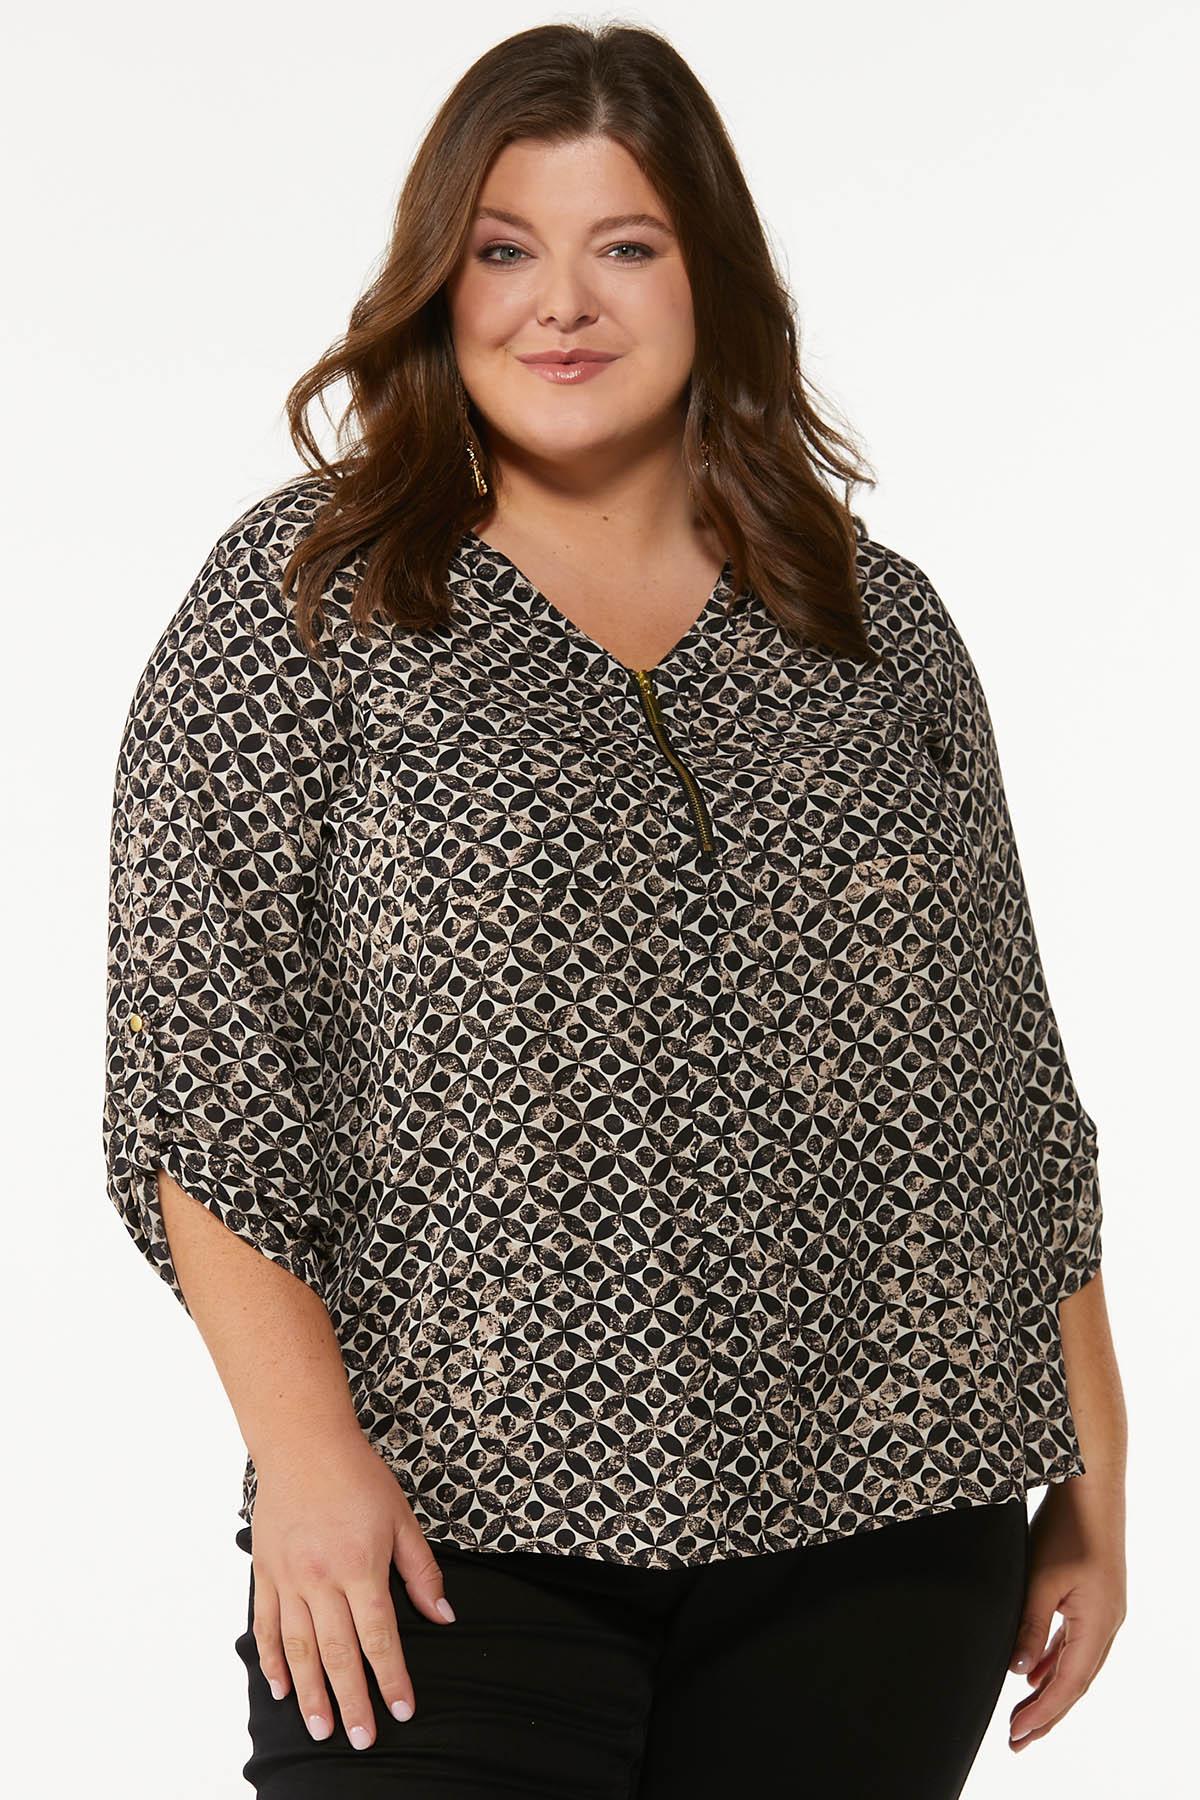 Plus Size Abstract Print Equipment Top